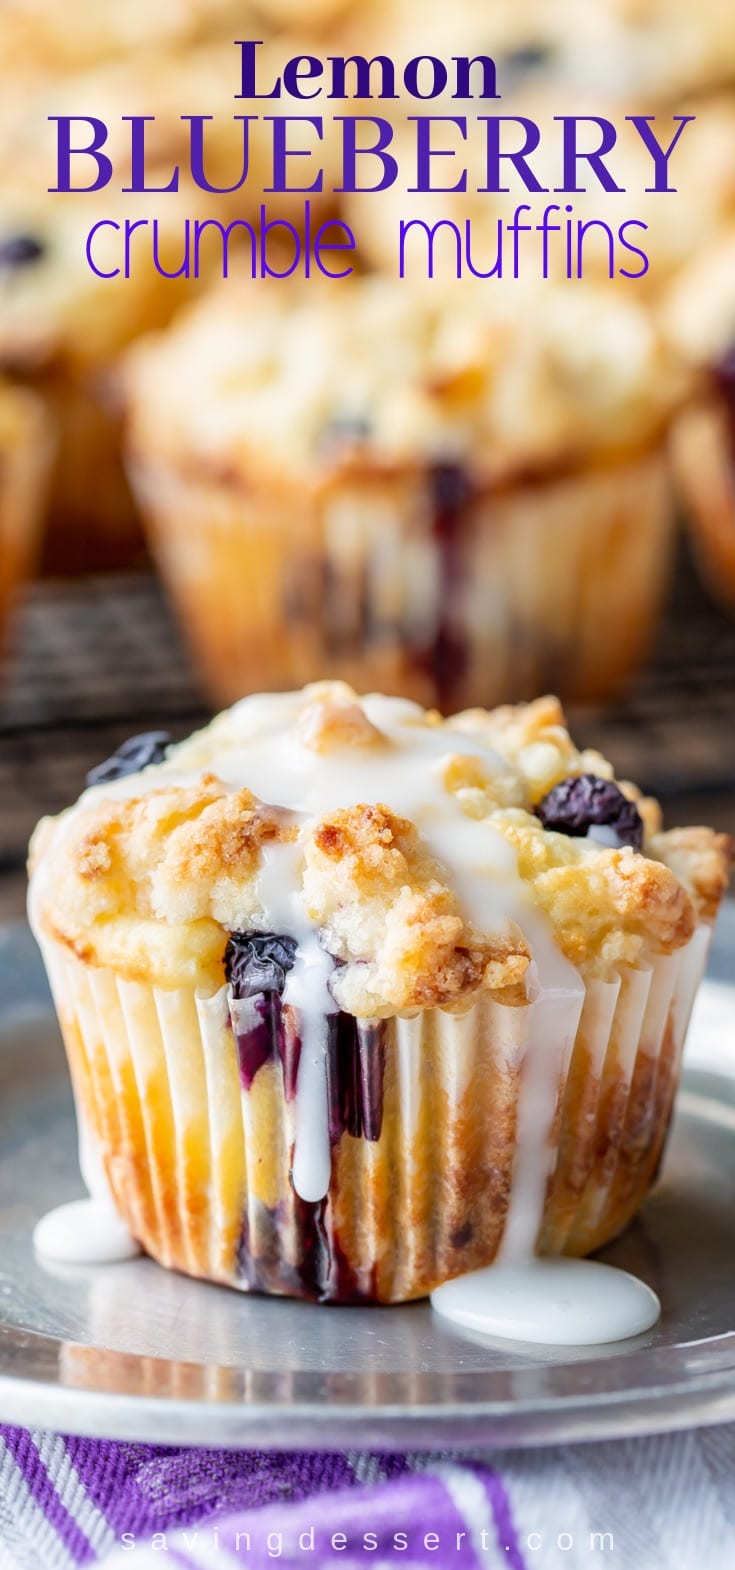 Lemon Blueberry Muffins with a Lemon Crumble Topping ~ Plump, ripe blueberries and tart lemon juice are the stars in these wonderfully moist, sour cream muffins #lemonblueberrycrumble #blueberrycrumblemuffins #muffins #blueberrymuffins #crumble #sourcreammuffins #blueberry